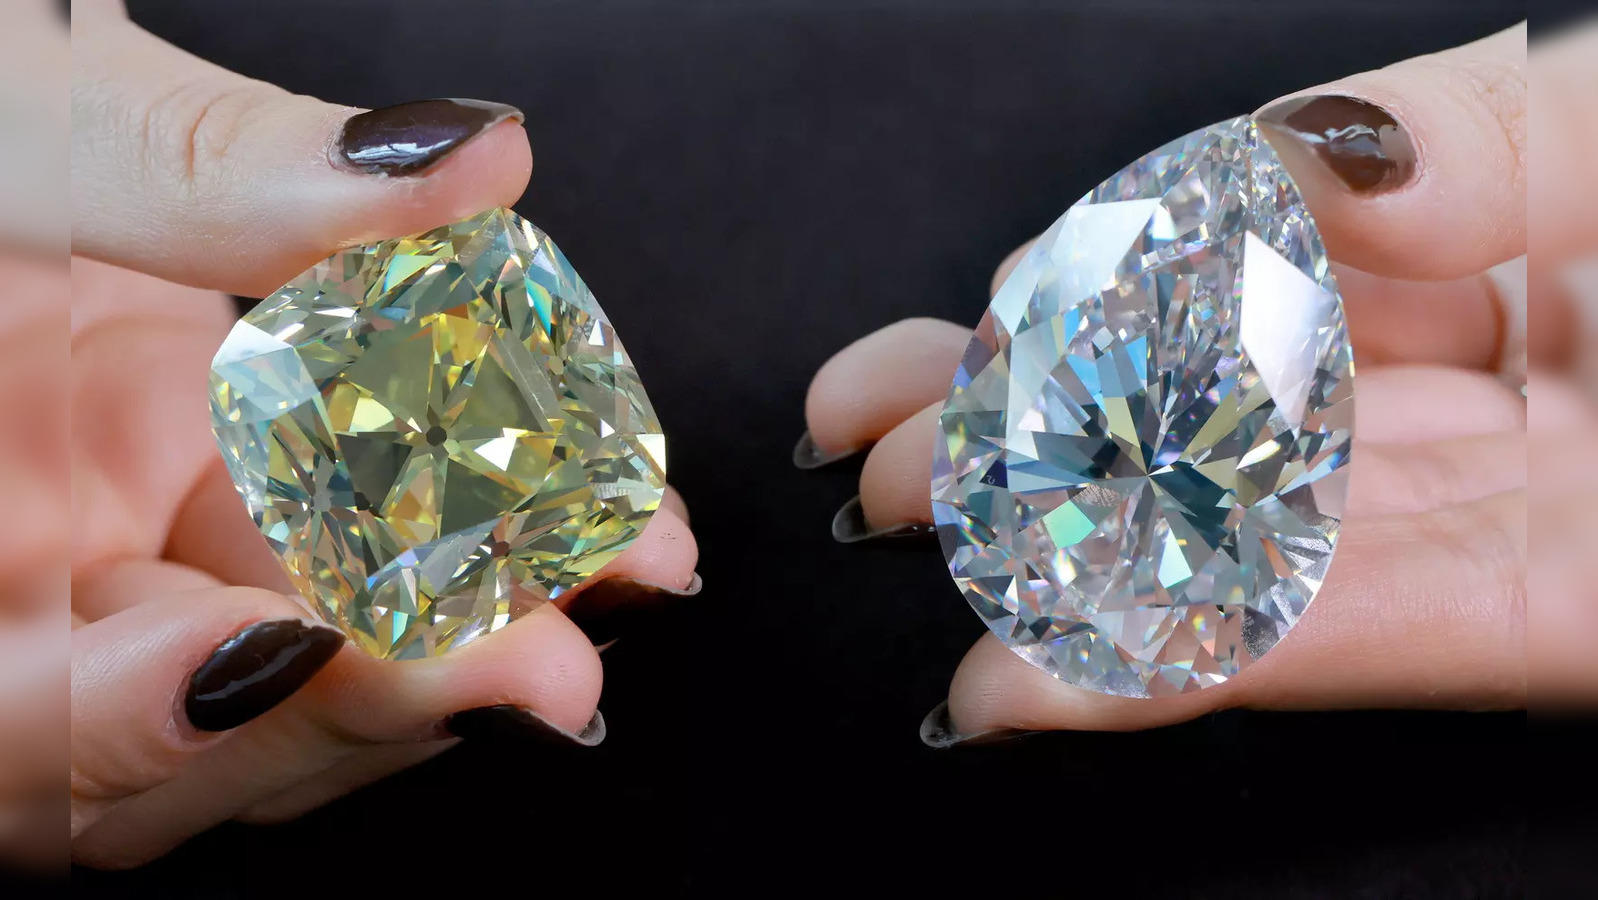 228 carat egg sized diamond fetches over 21 mn 205 carat yellow stone sells for more than 14 mn at geneva auction